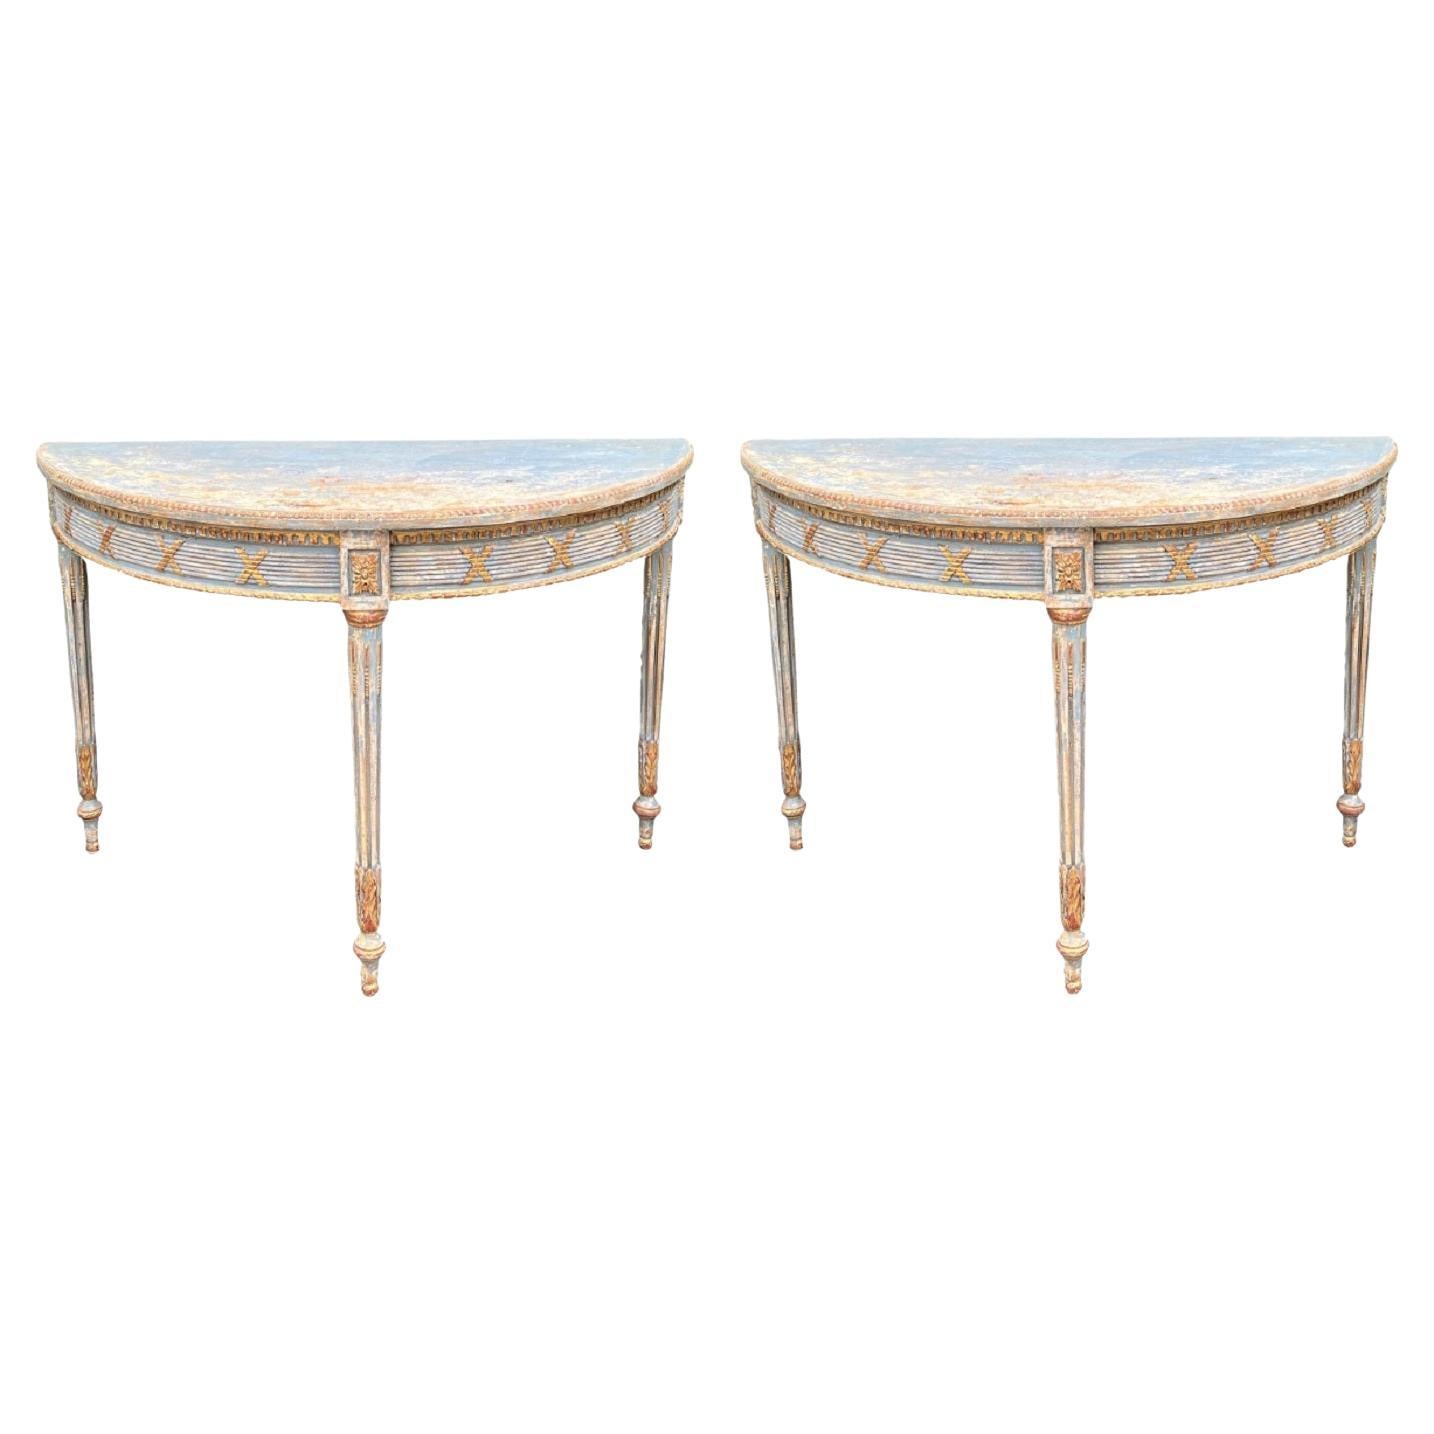 Pair of 18th C Style Dennis & Leen French Directoire Demilune Console Tables